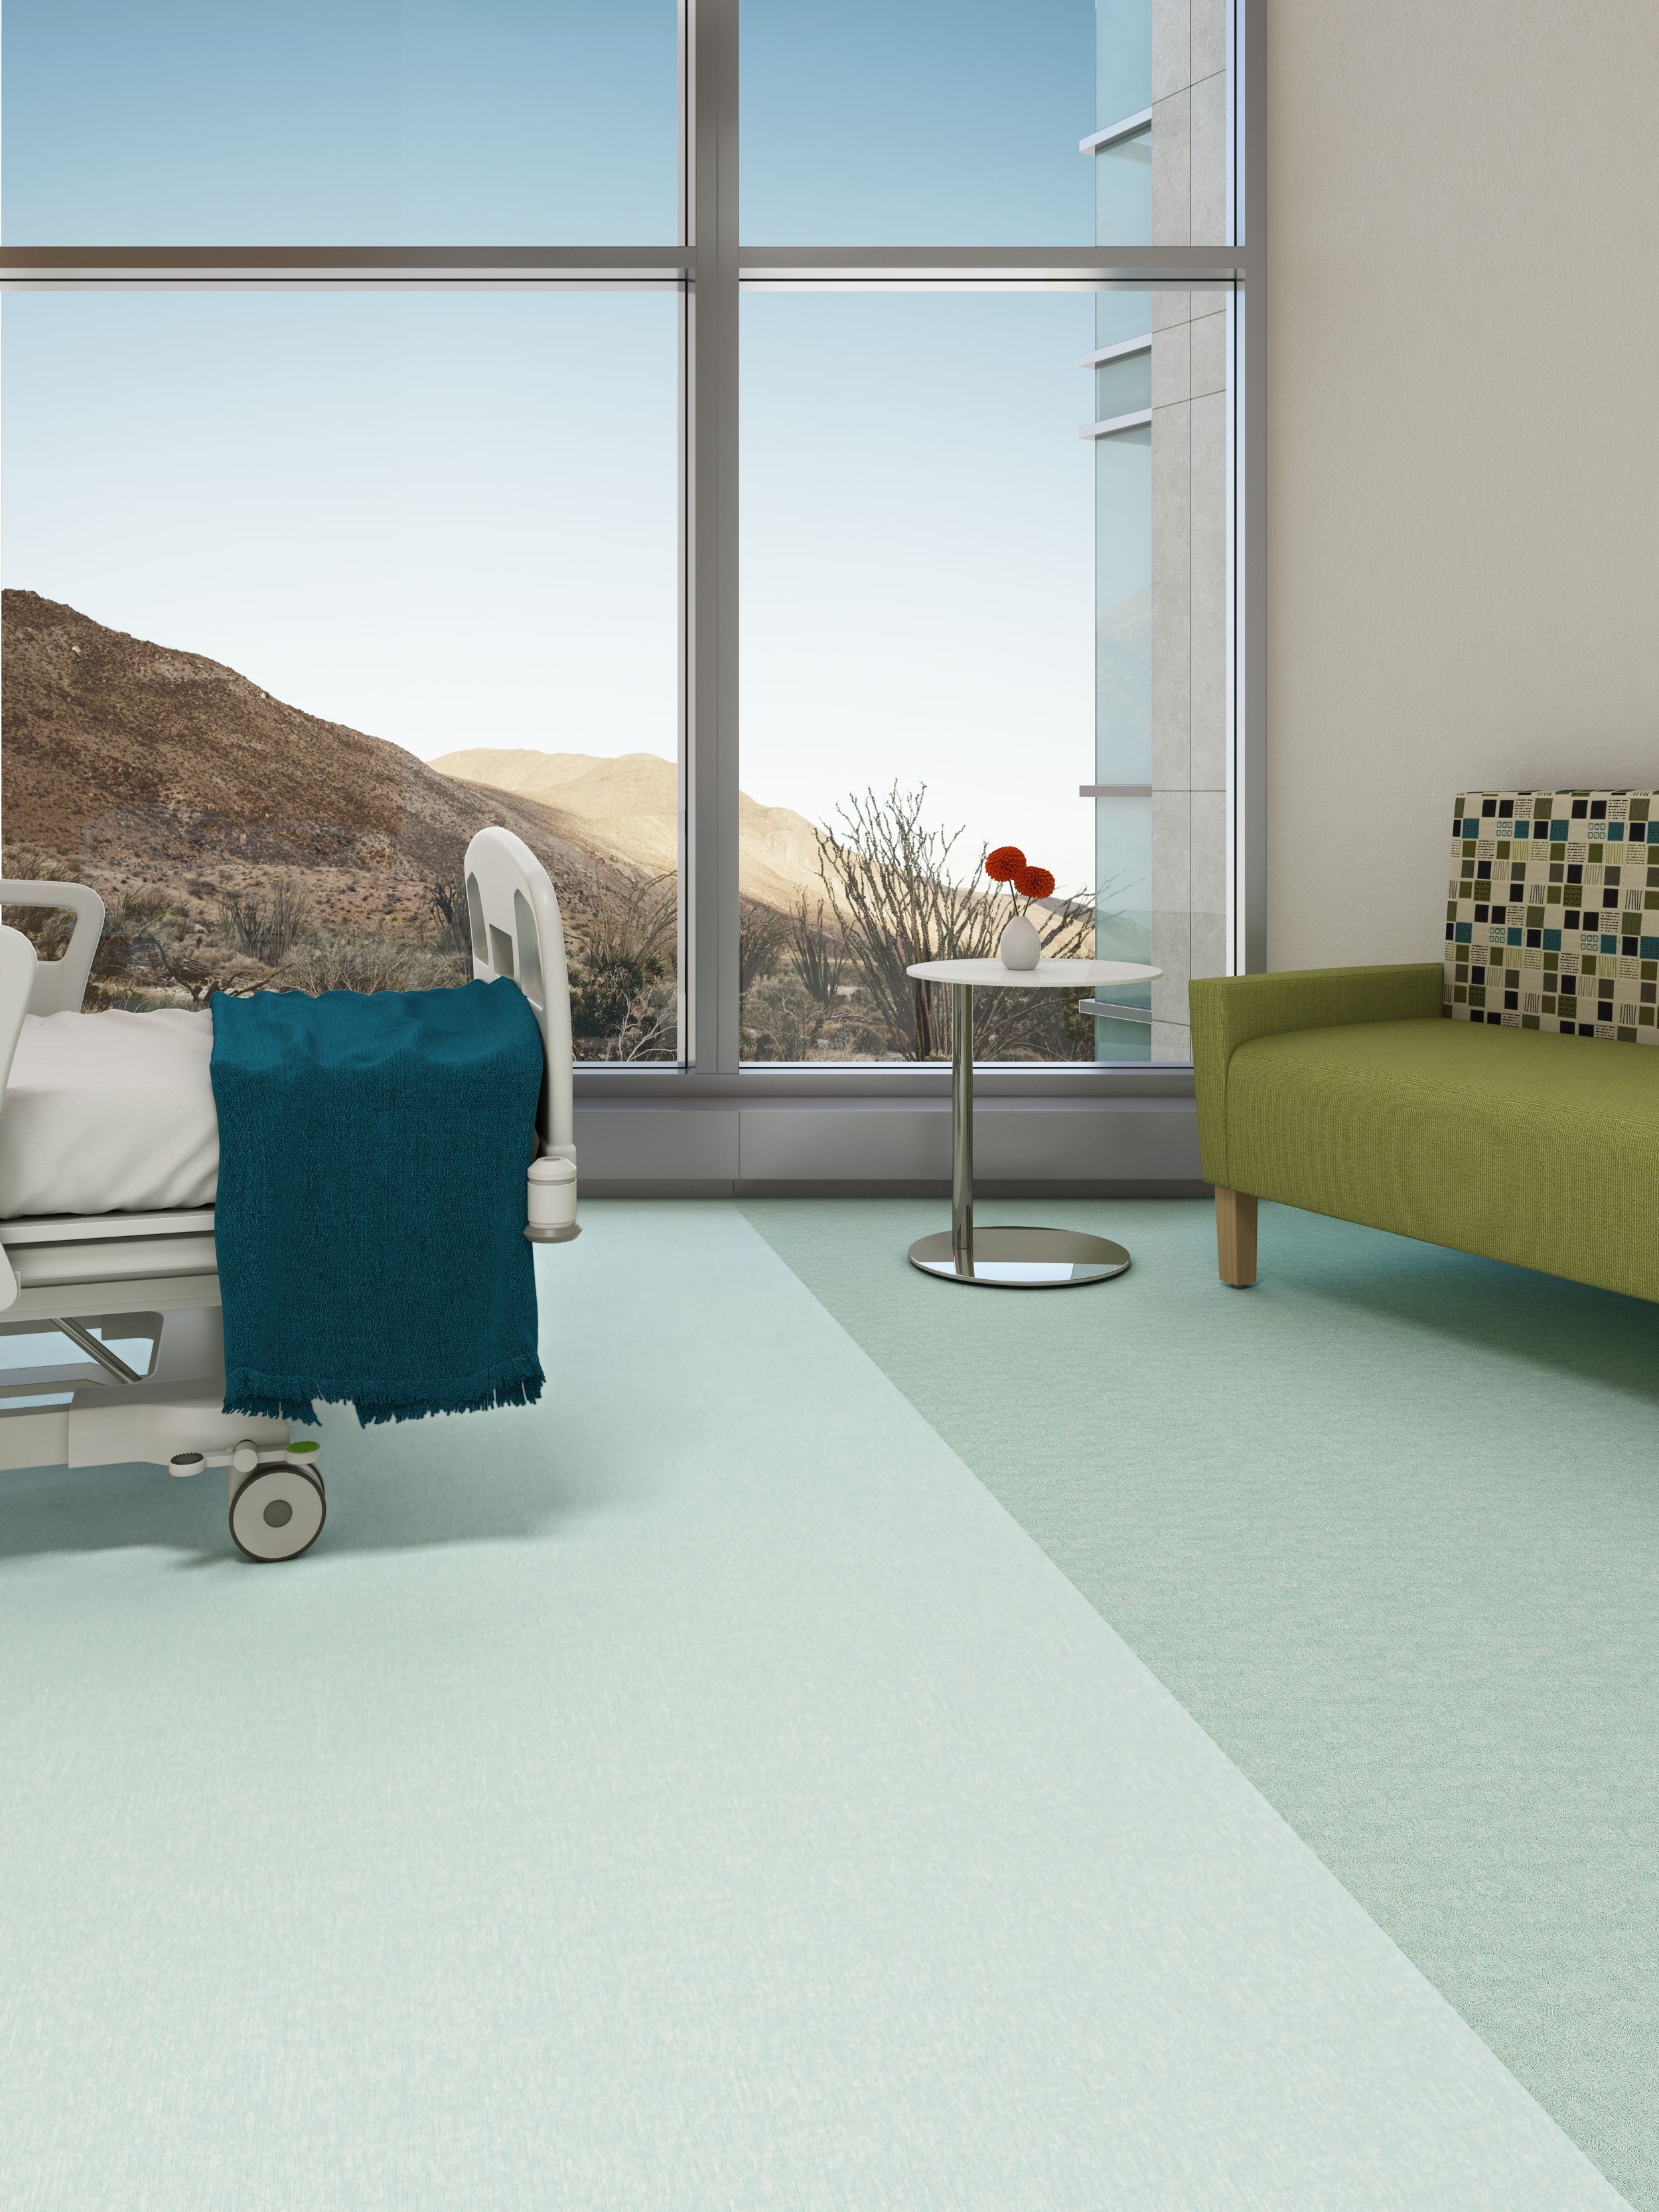 Interface Spike-tacular and Bloom With a View vinyl sheet in hospital patient room imagen número 8